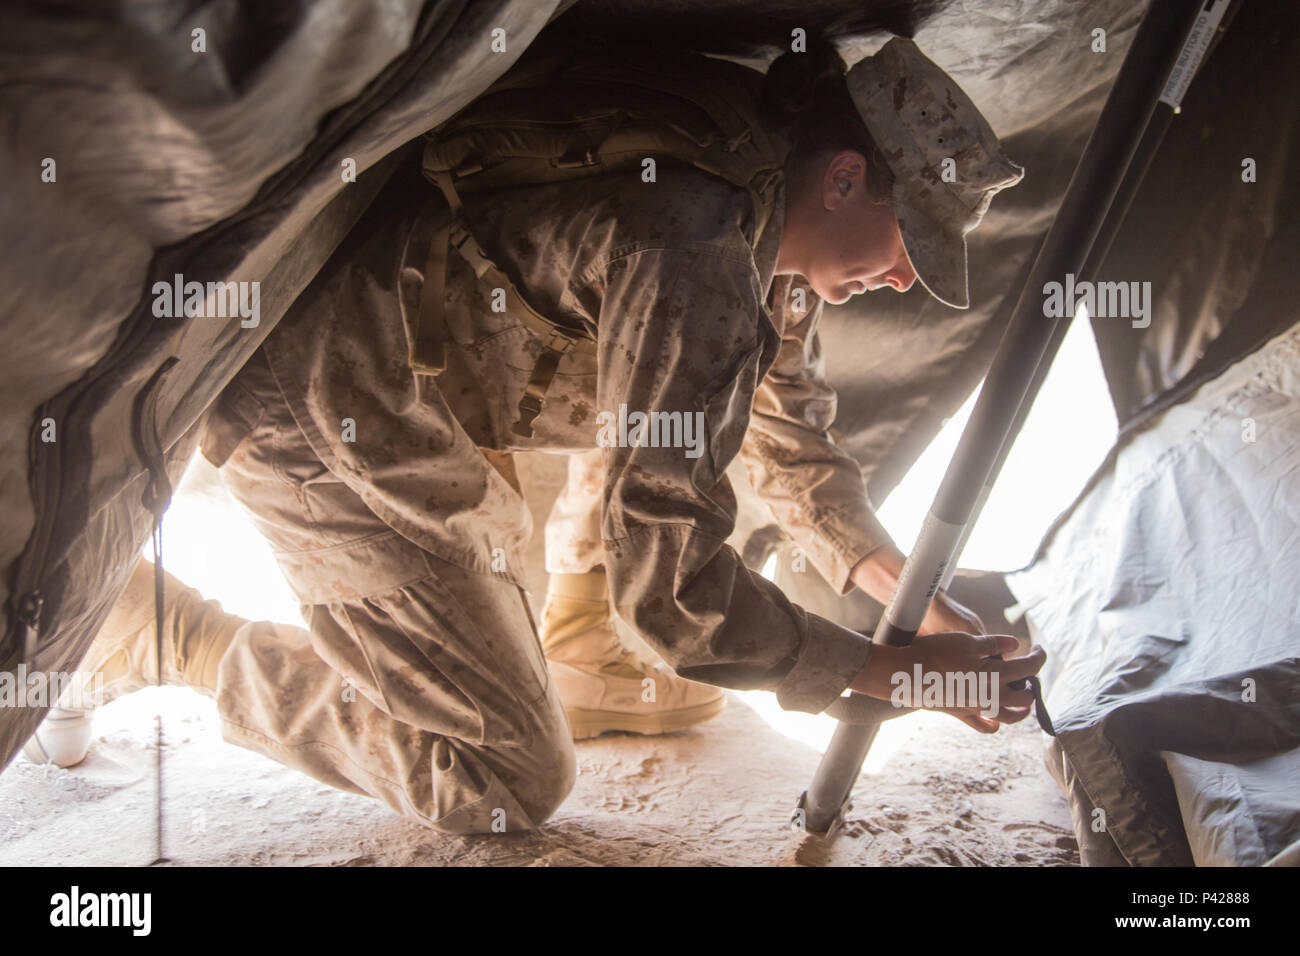 Lance Cpl. Shelbi Lindsey clips the lining of a 305 tent onto tent poles during set up for the 11th Marine Expeditionary Unit’s Realistic Urban Training exercise aboard Marine Corps Air Station Yuma, Ariz., June 6, 2016. RUT will prepare the 11th MEU’s Marines and sailors for their upcoming deployment, enhancing their combat skills in a simulated urban environment. Lance Cpl. Shelbi Lindsey is with the law enforcement attachment to the 11th Marine Expeditionary Unit. (U.S Marine Corps photo by Lance Cpl. Brandon Maldonado/ Released) Stock Photo